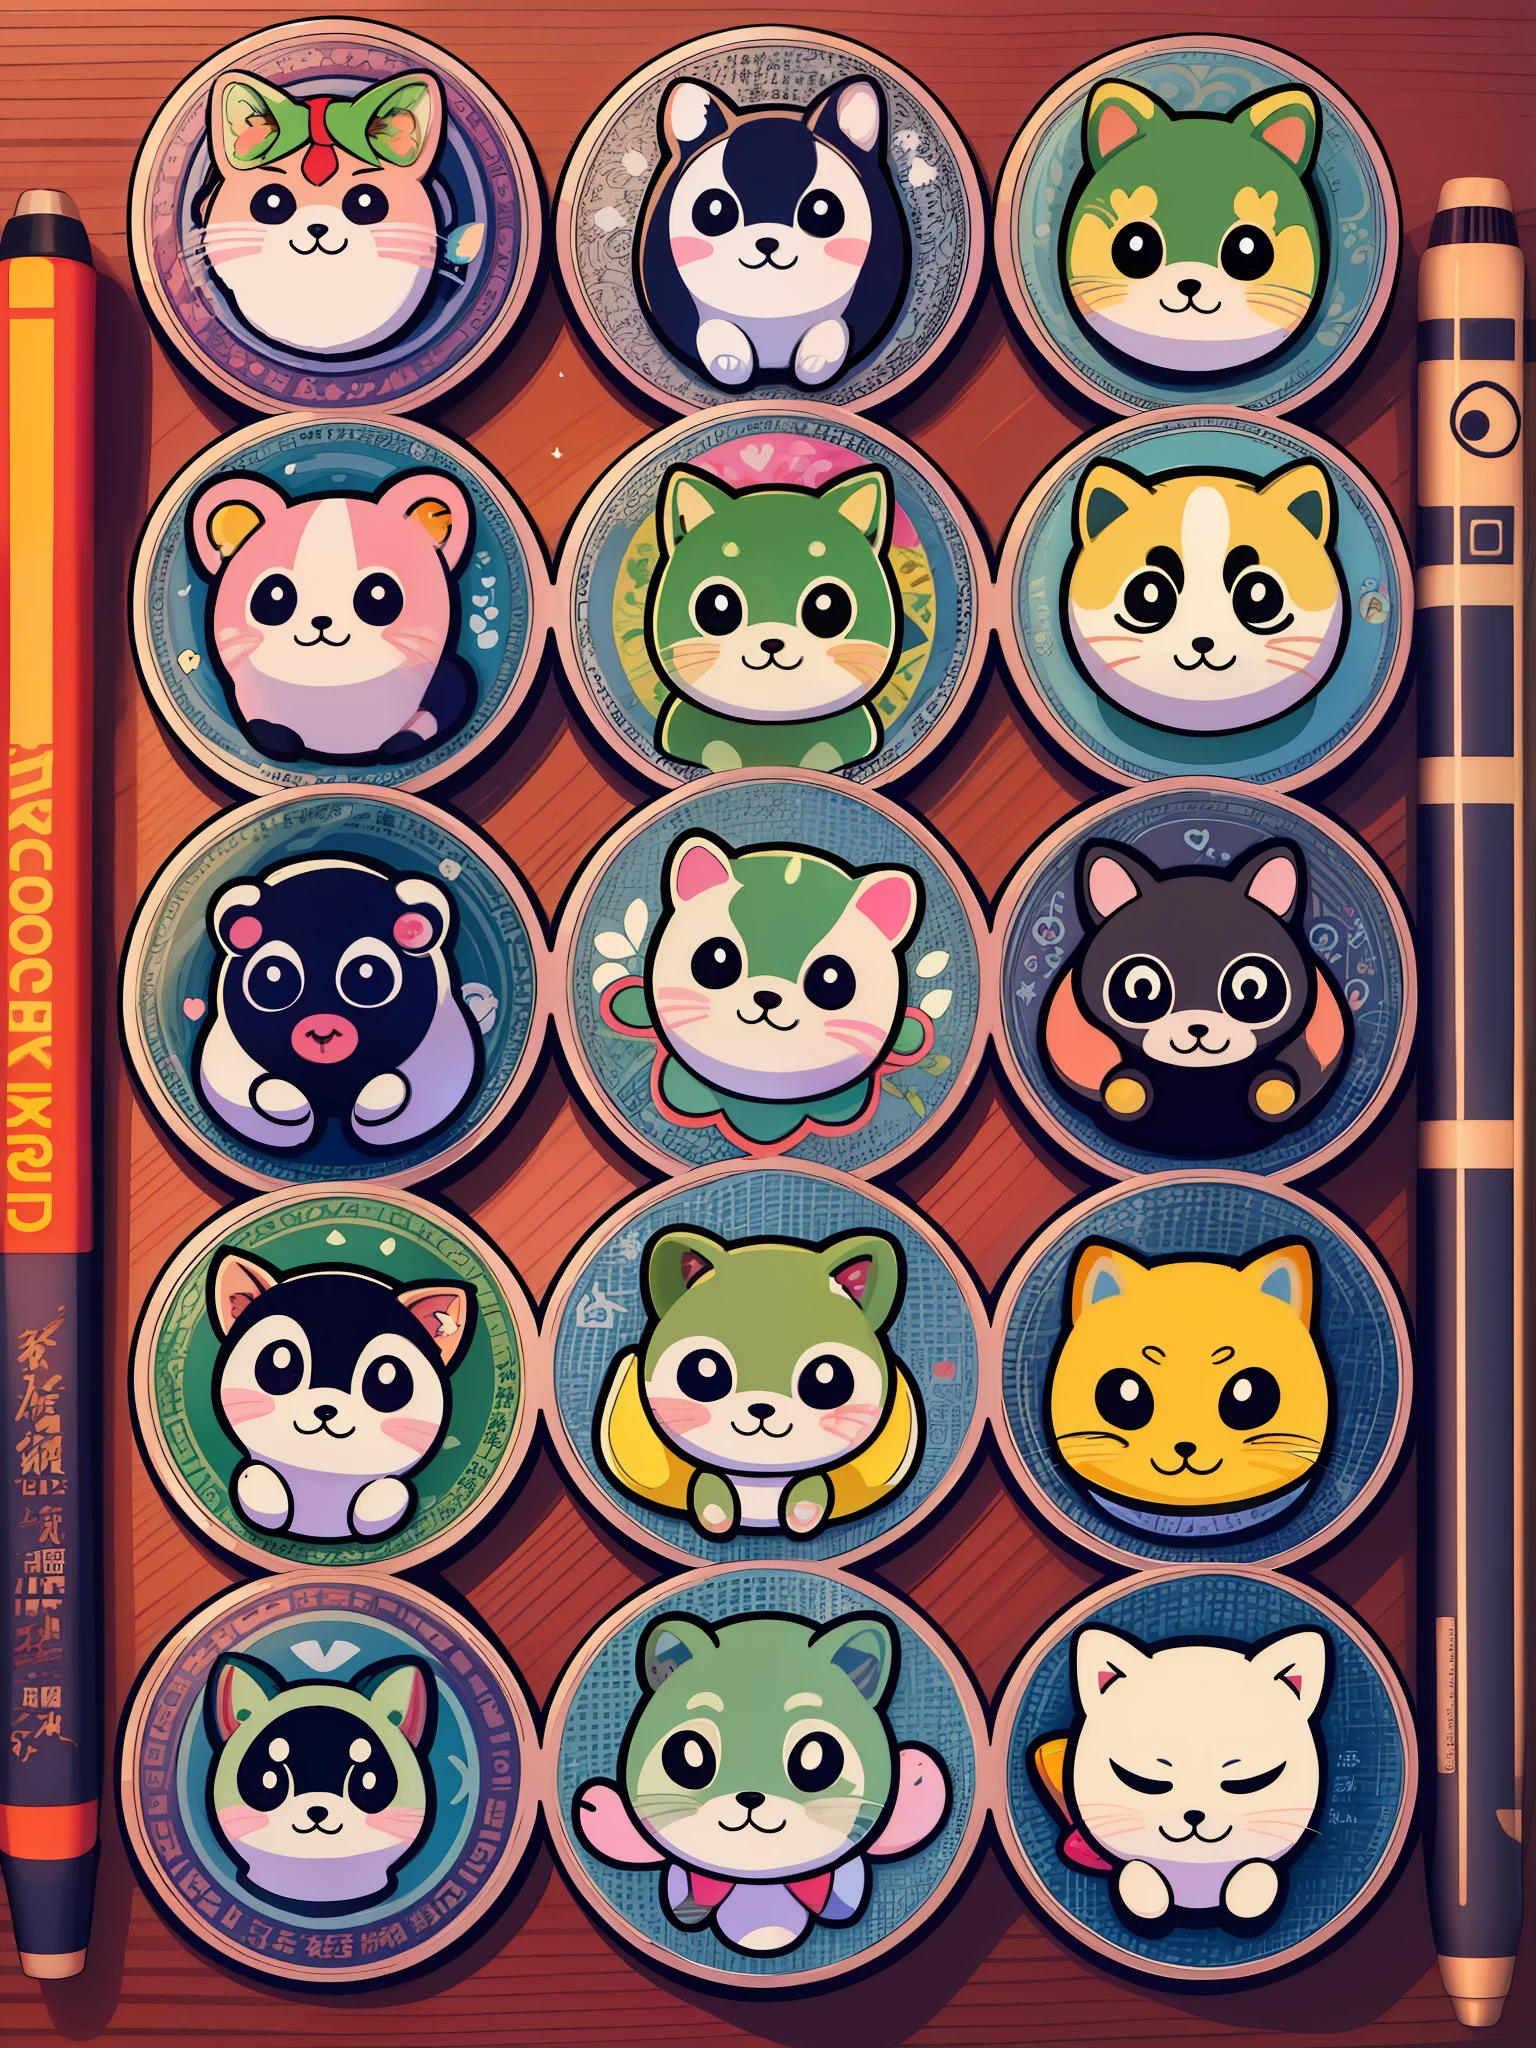 There are more than 20 different animals and text written in Chinese, hand-drawn cartoon art style, art cover, kawaii the cutest sticker, sticker illustration, Shiba Mansion, Misei Kono, cute features, Nakamotojie, by Gusukuma Seihō, sticker illustration, cute characters